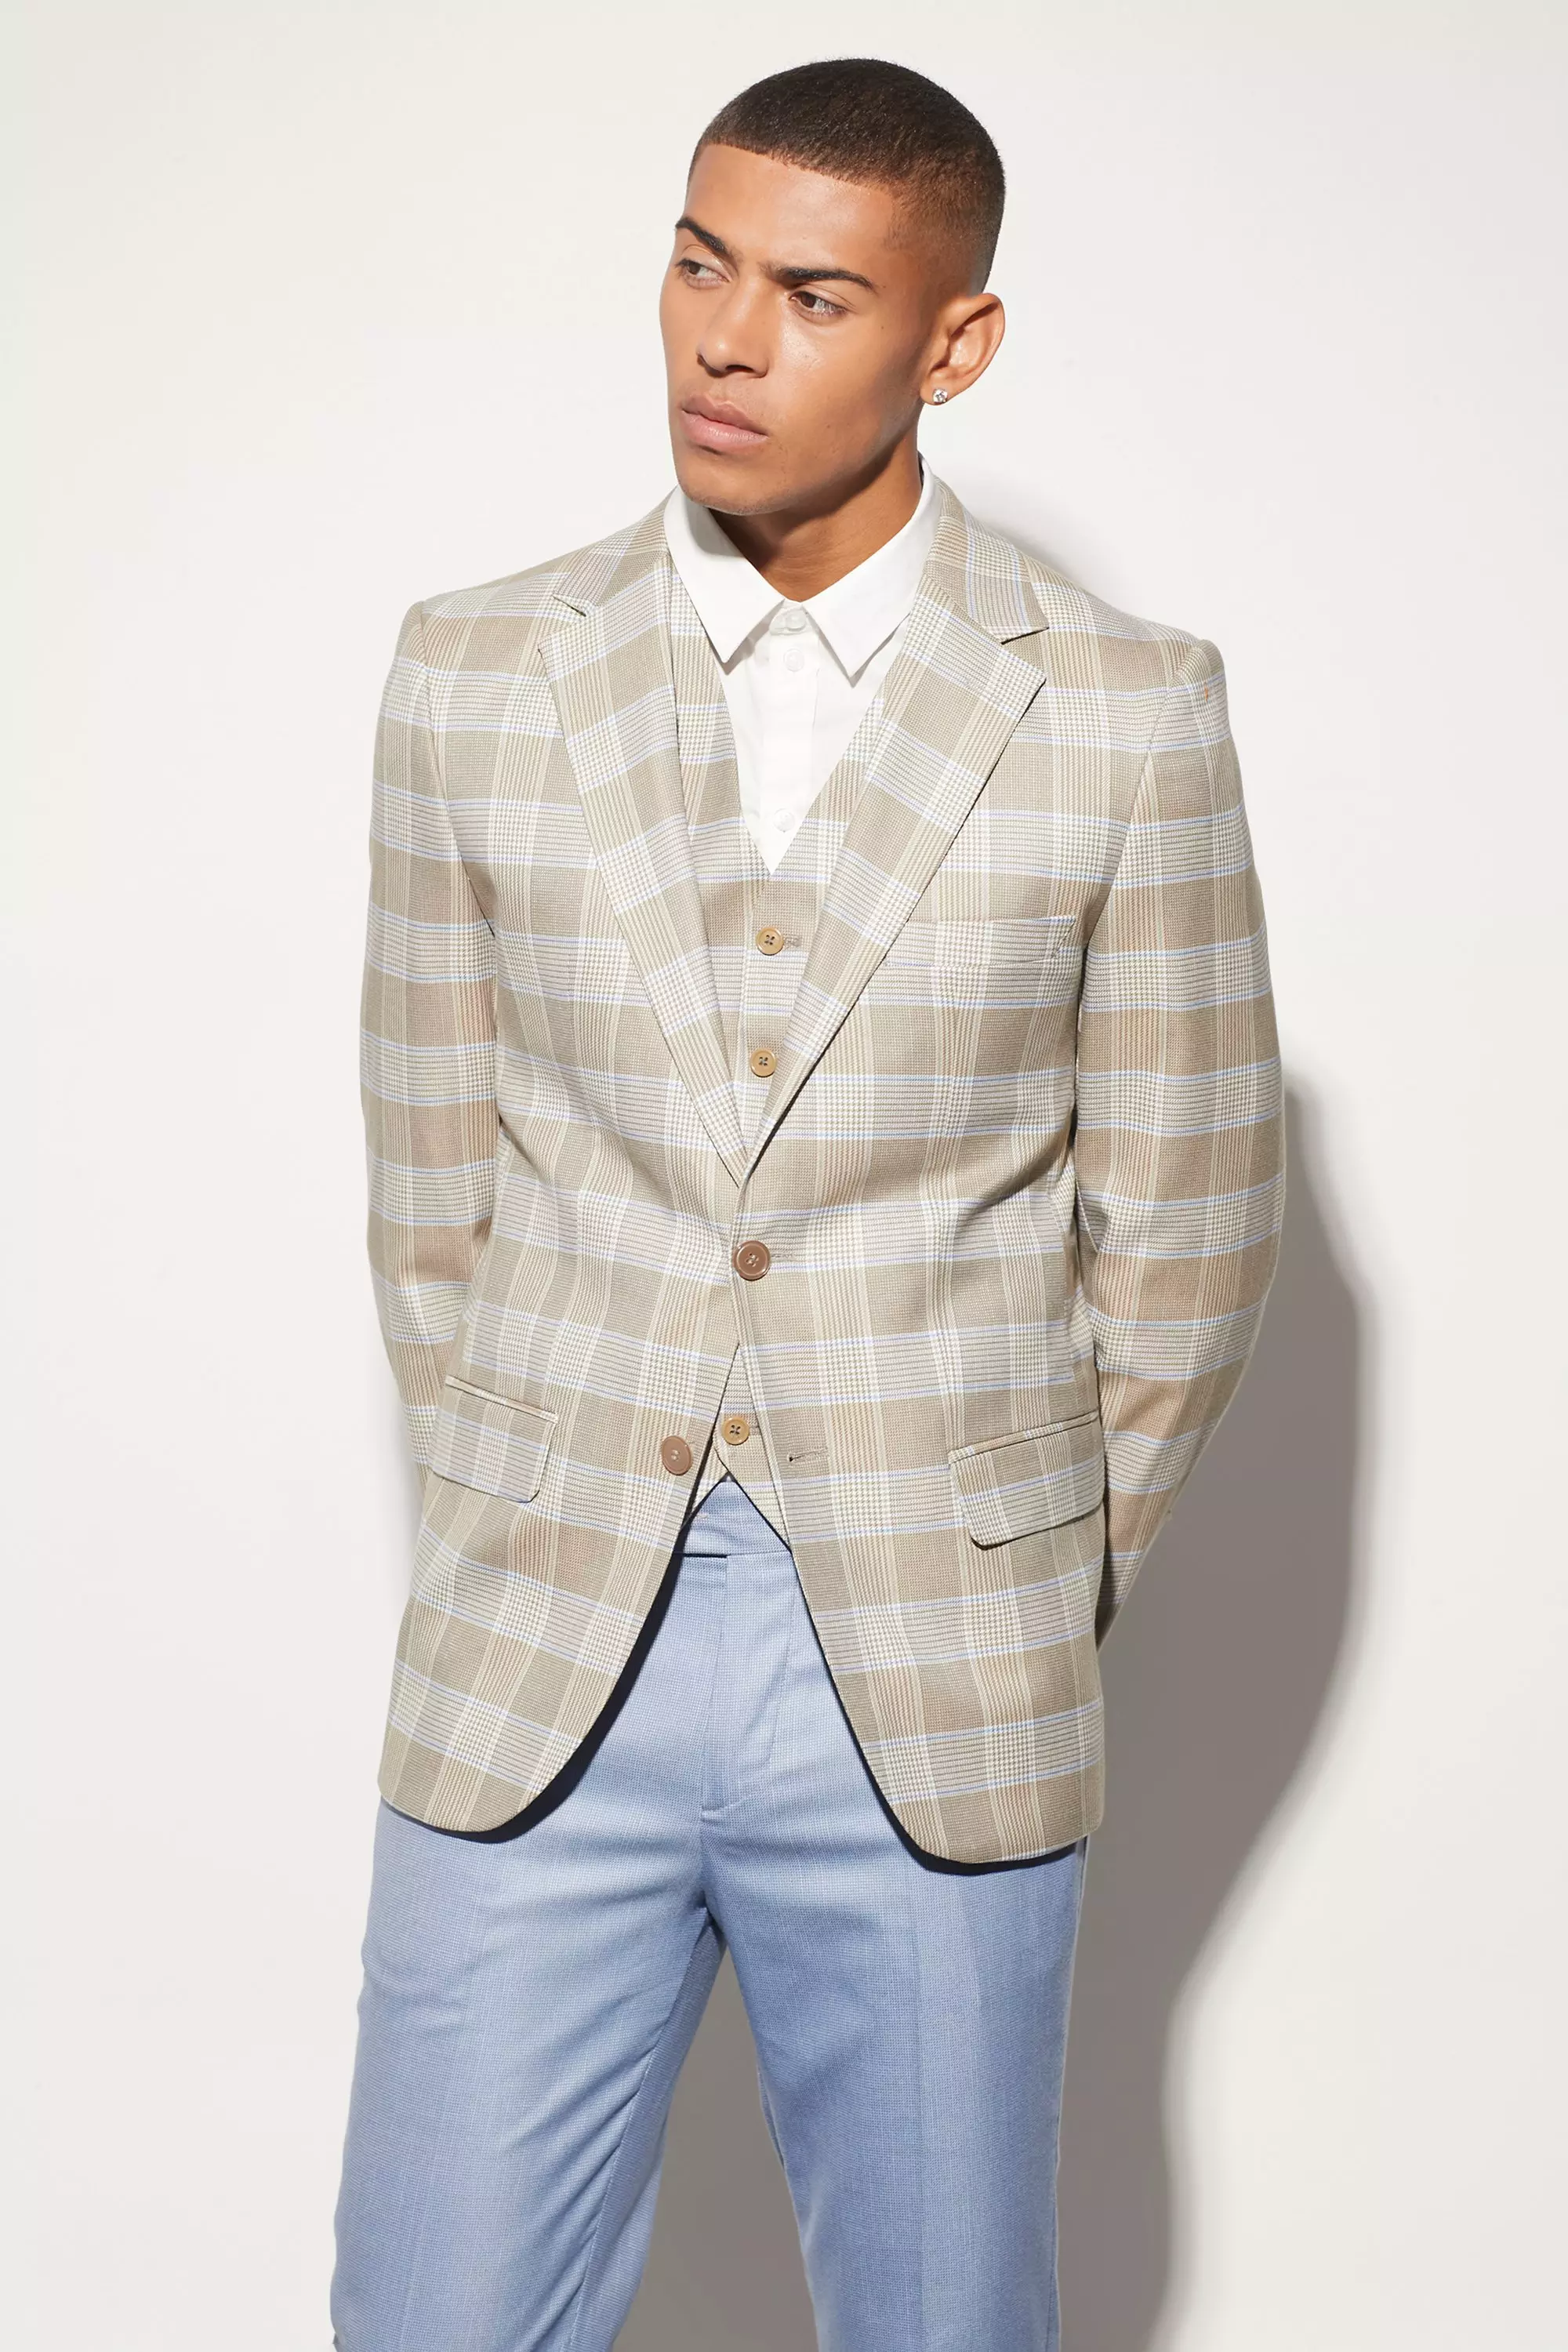 Blue Slim Single Breasted Check Suit Jacket